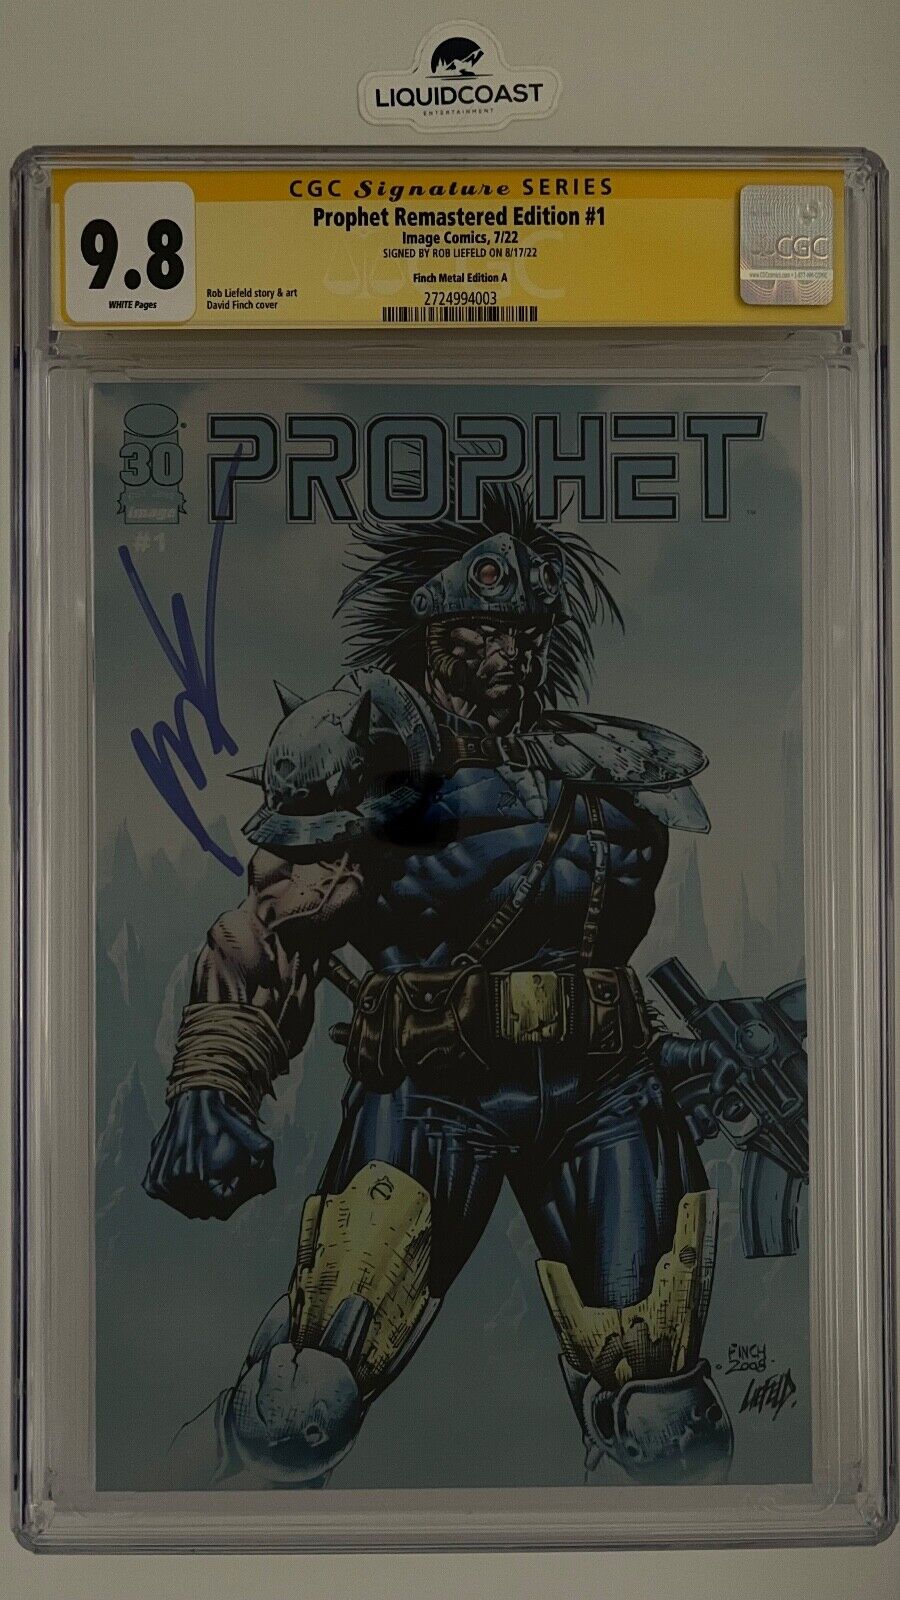 Prophet Remastered Edition #1 SS CGC 9.8 SIGNED BY ROB LIEFELD